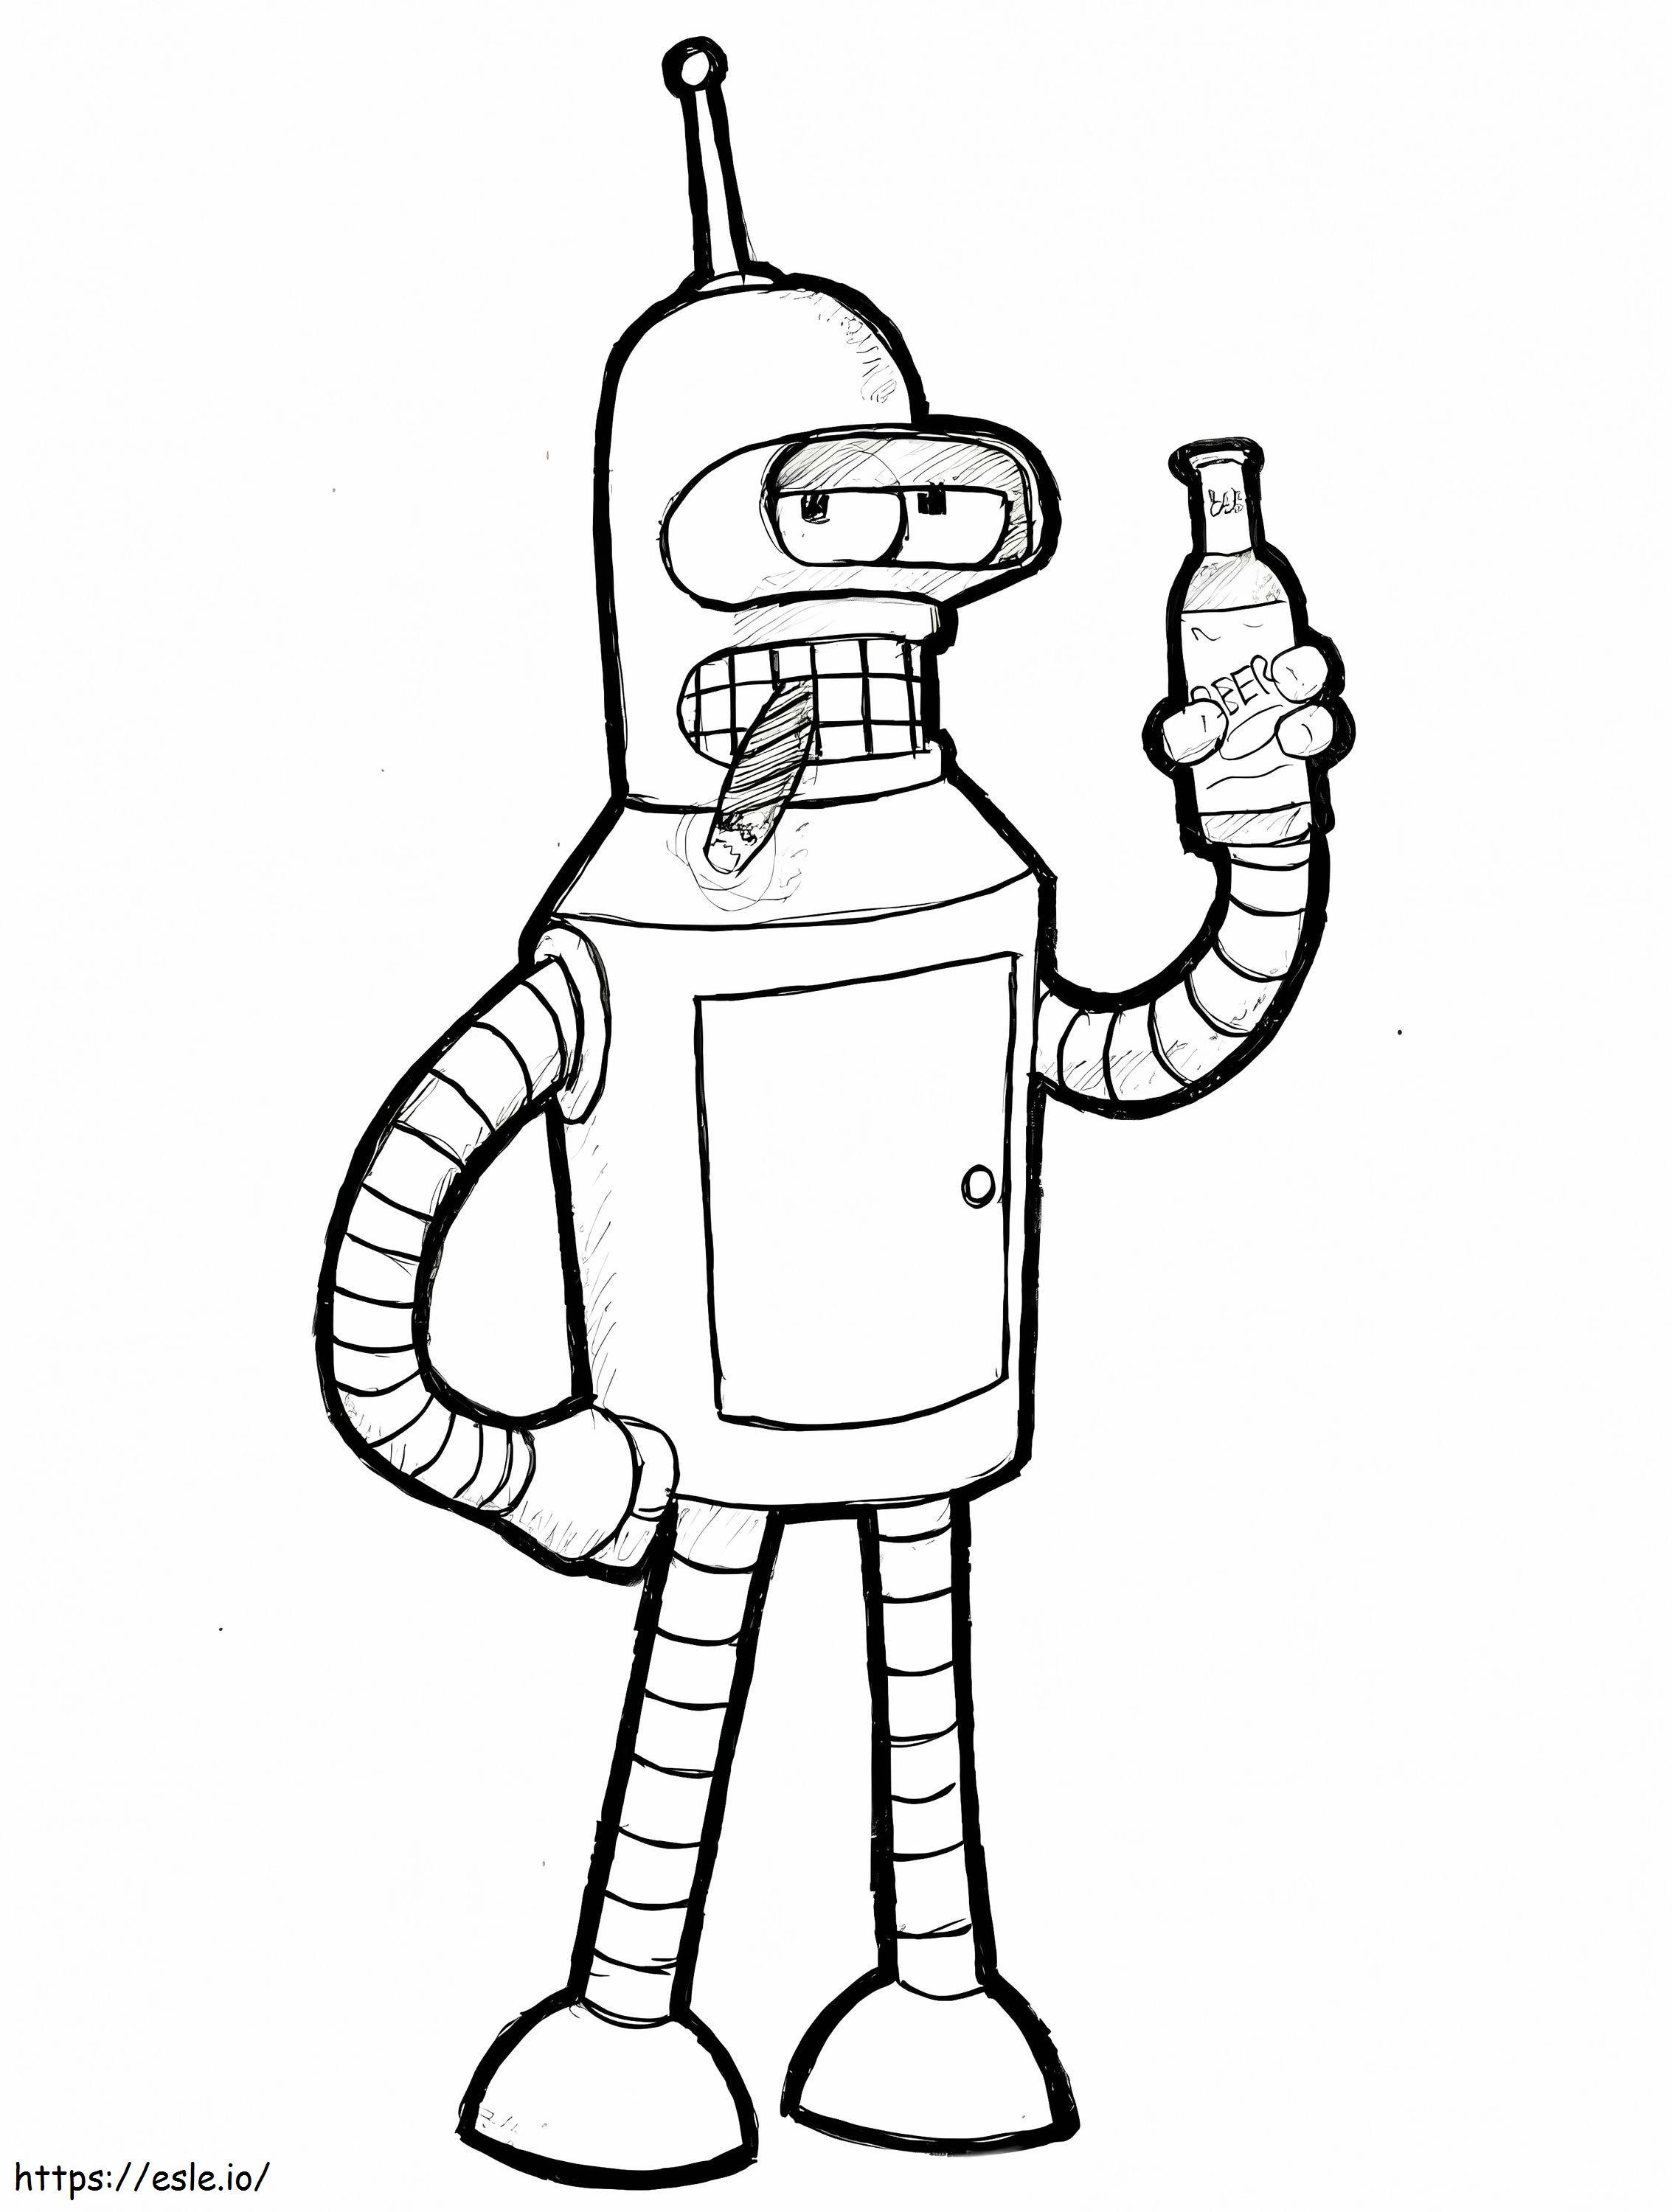 Bender 5 coloring page